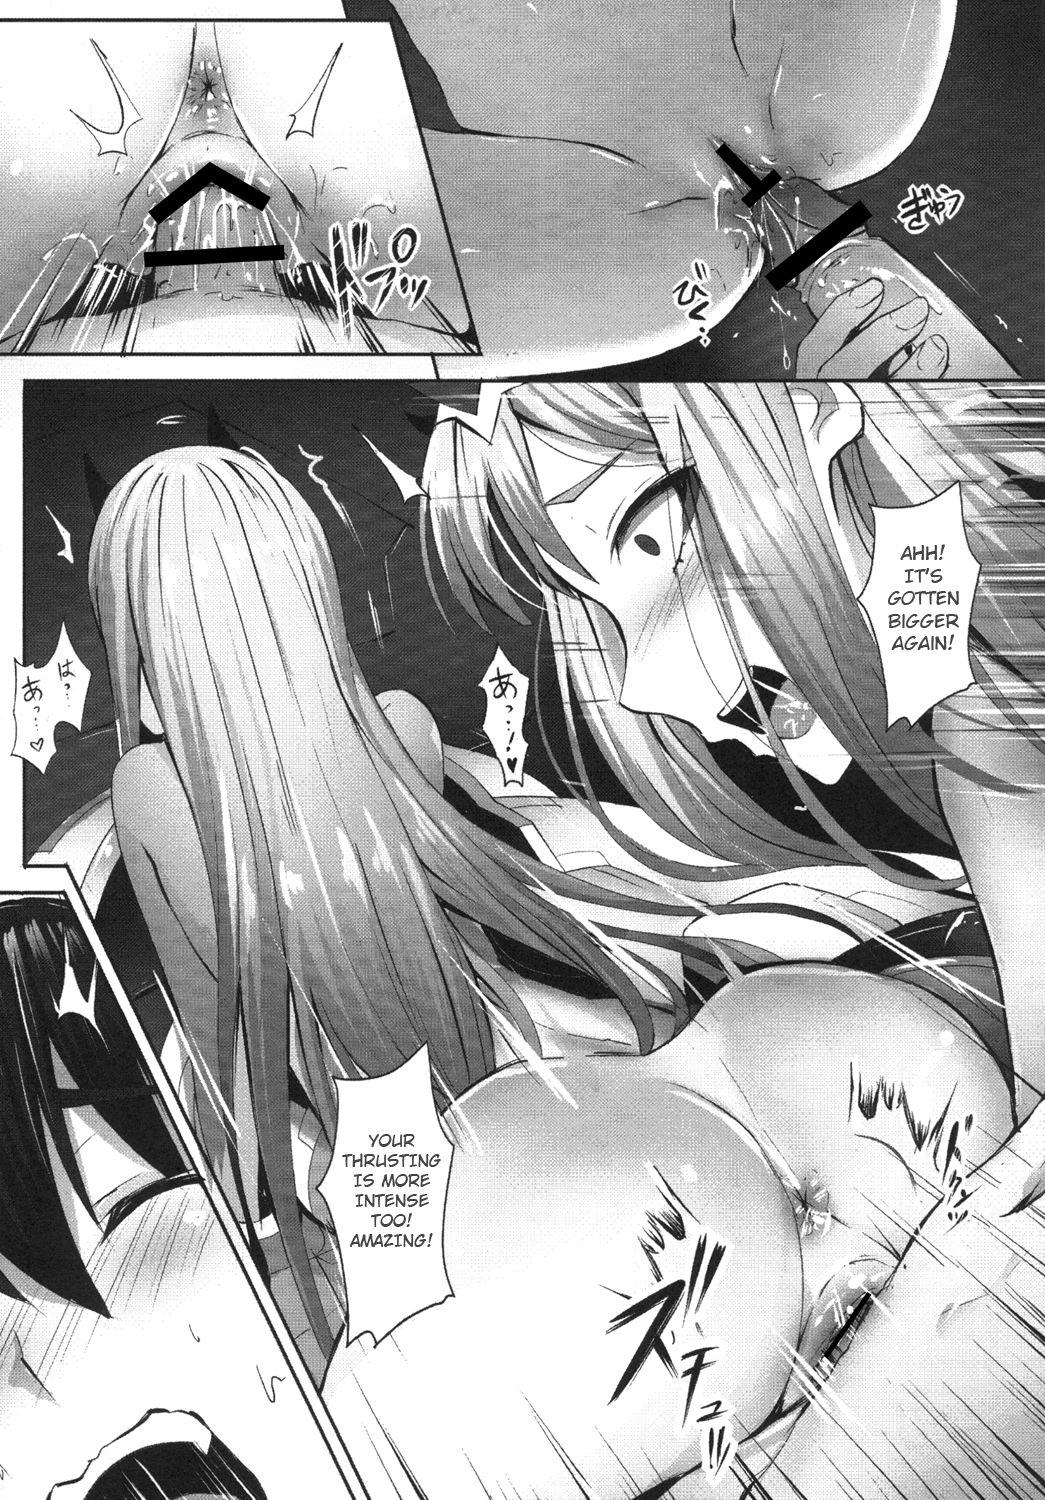 Hard Core Porn Darling need more Sexx - Darling in the franxx Classy - Page 6